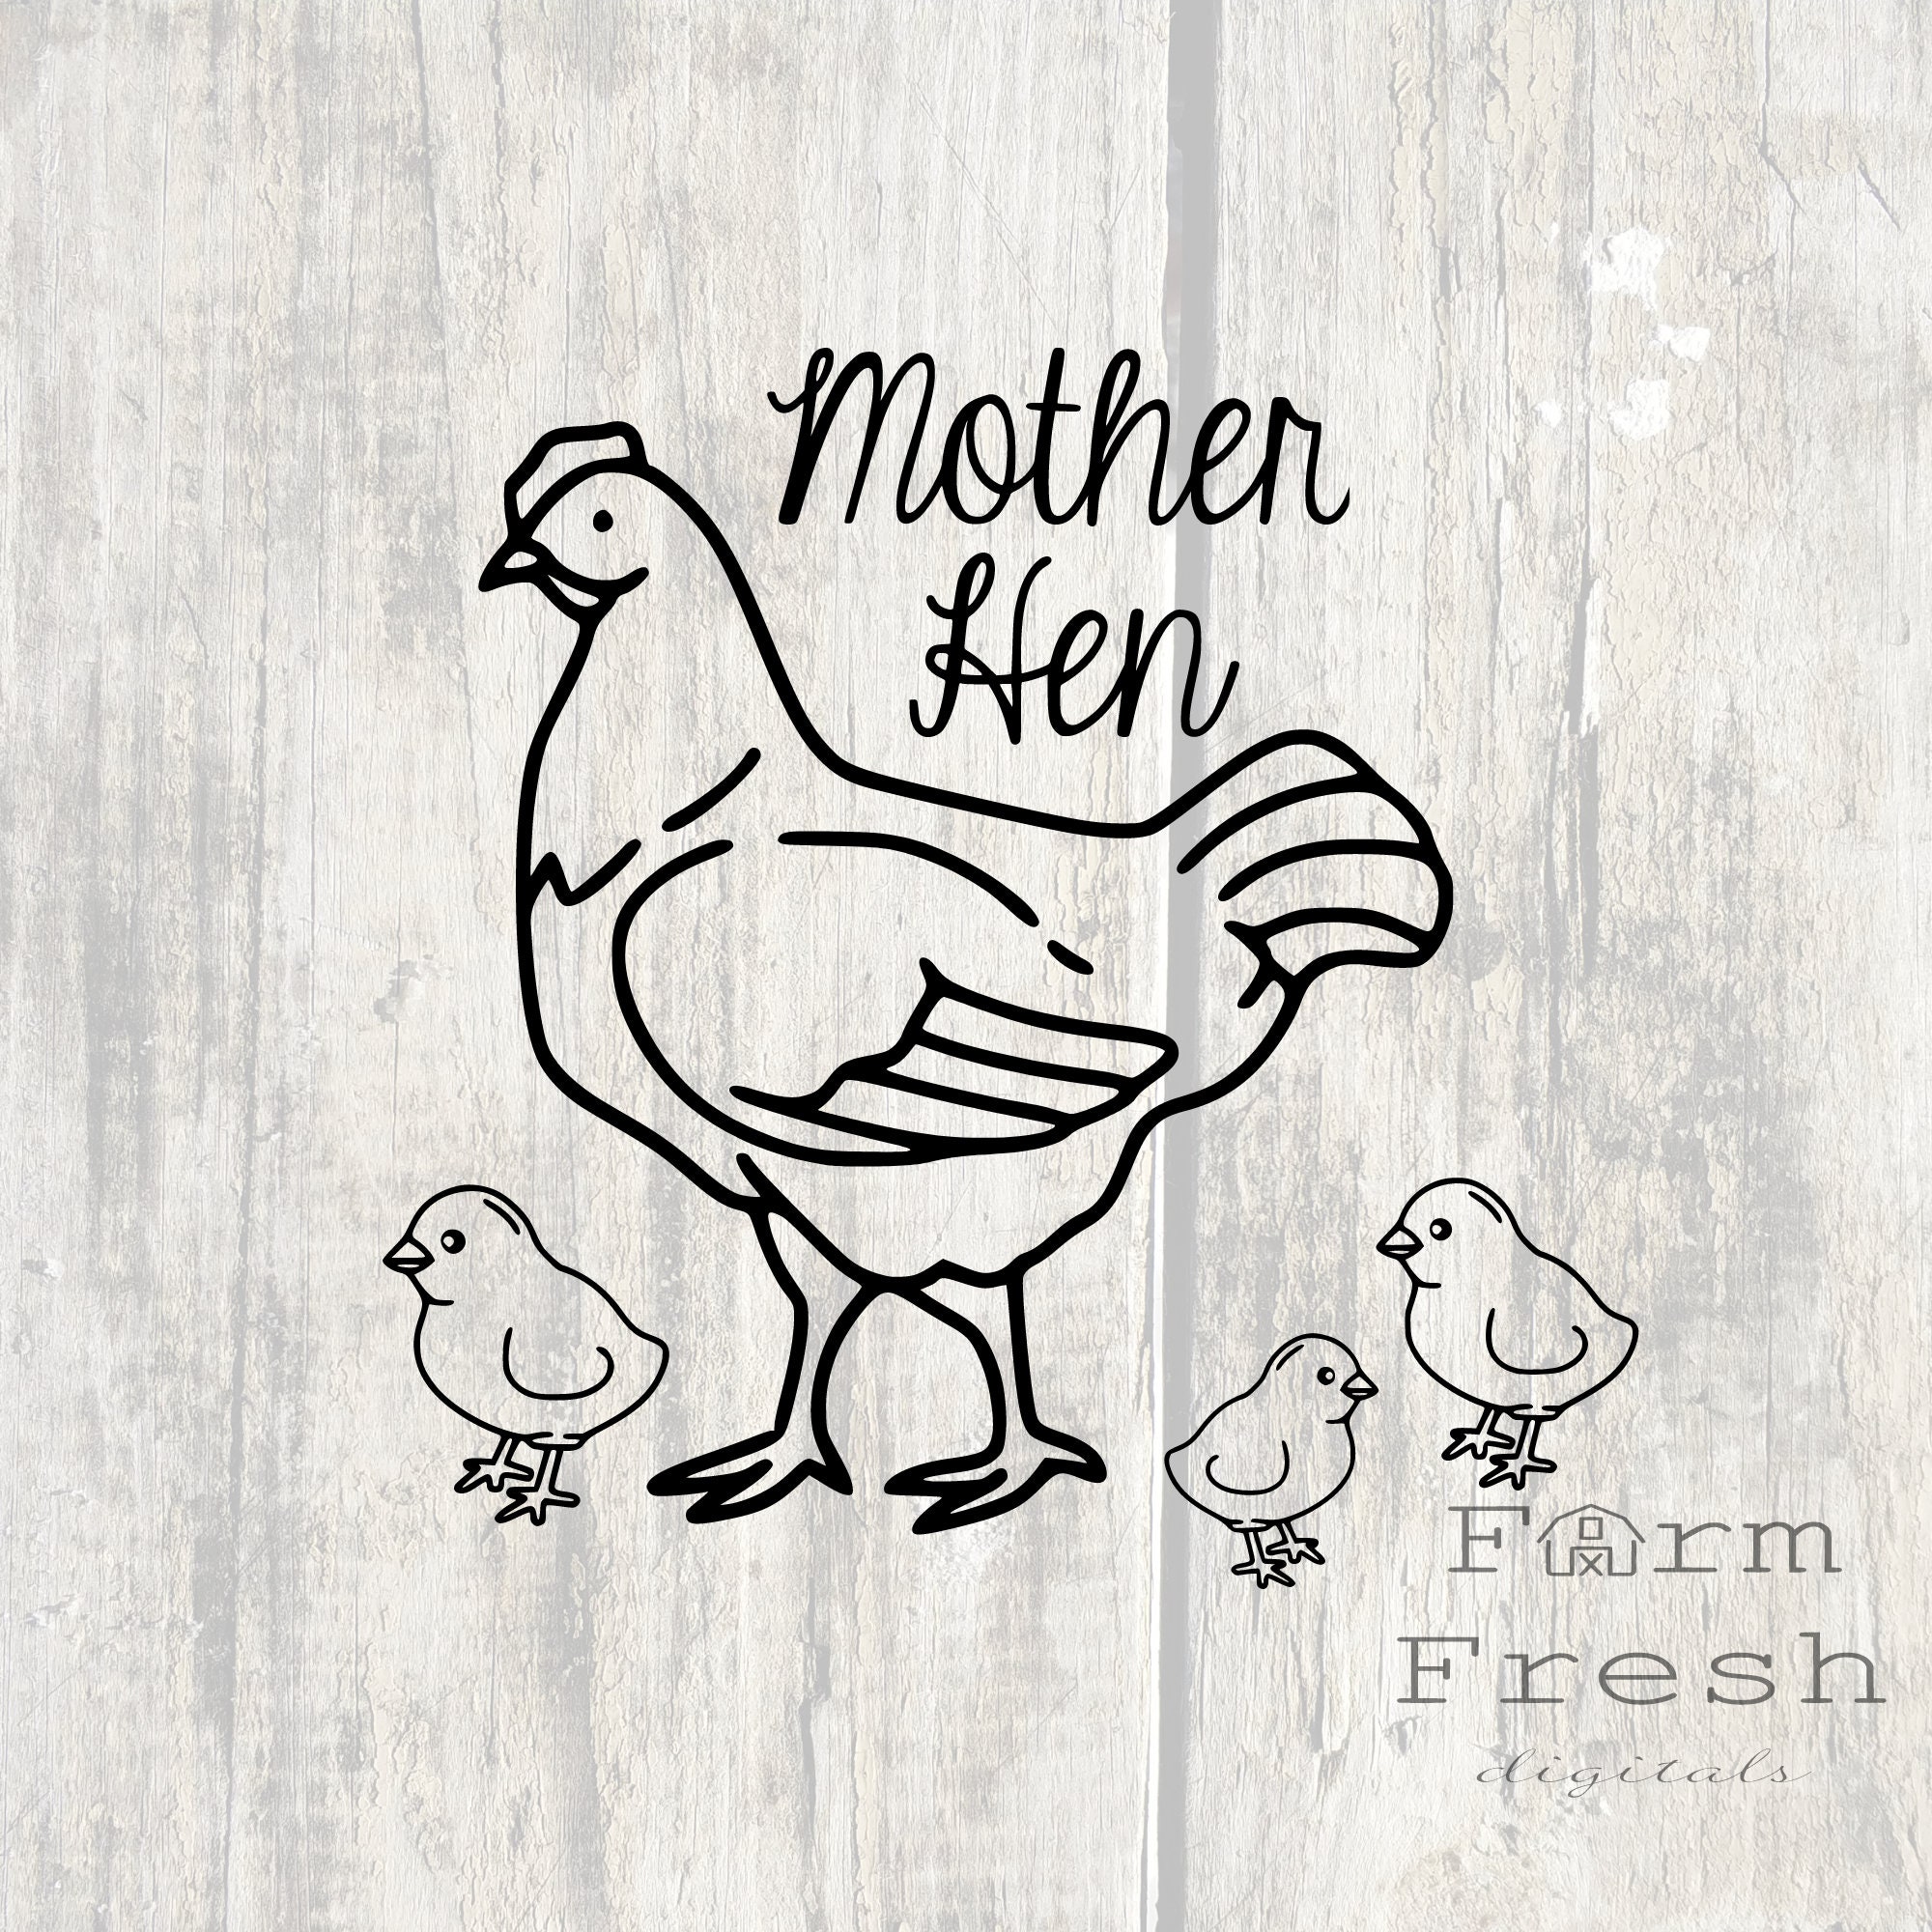 Download Mother hen svg mother hen chicken with baby chicks svg cricut | Etsy